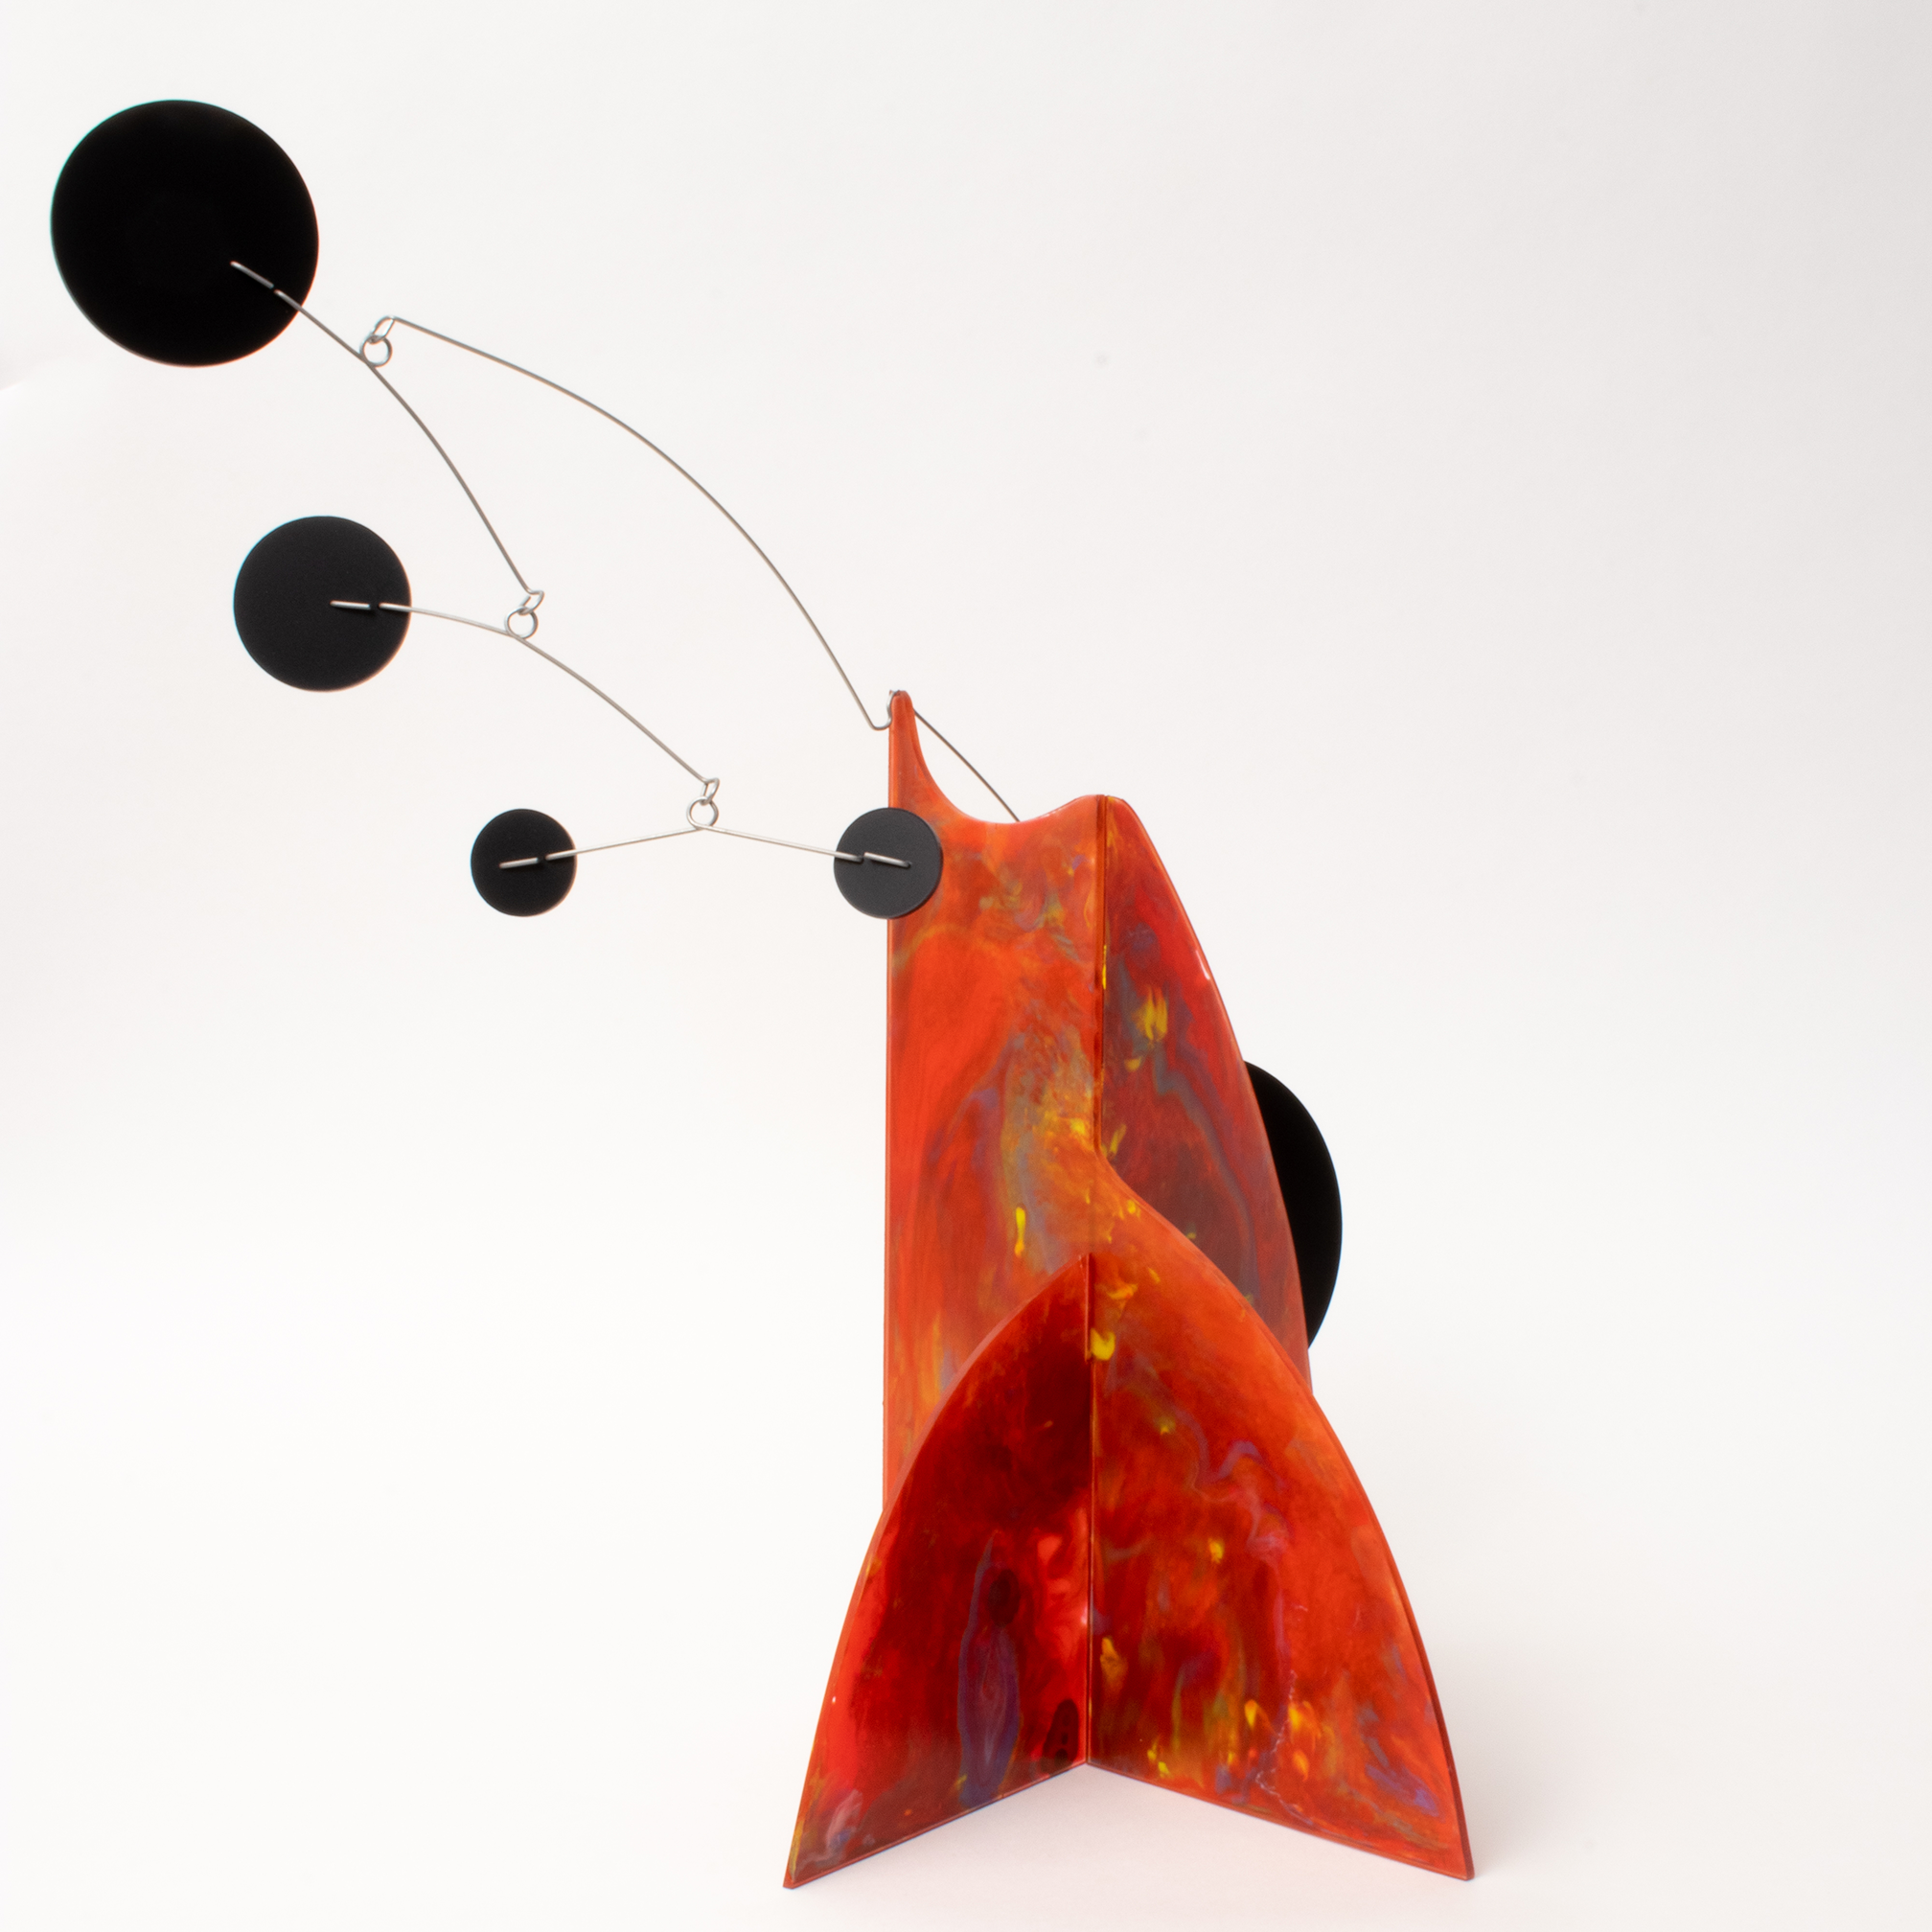 Eloquent Hand Painted Moderne Stabile Art Sculpture #5 – Atomic Mobiles™